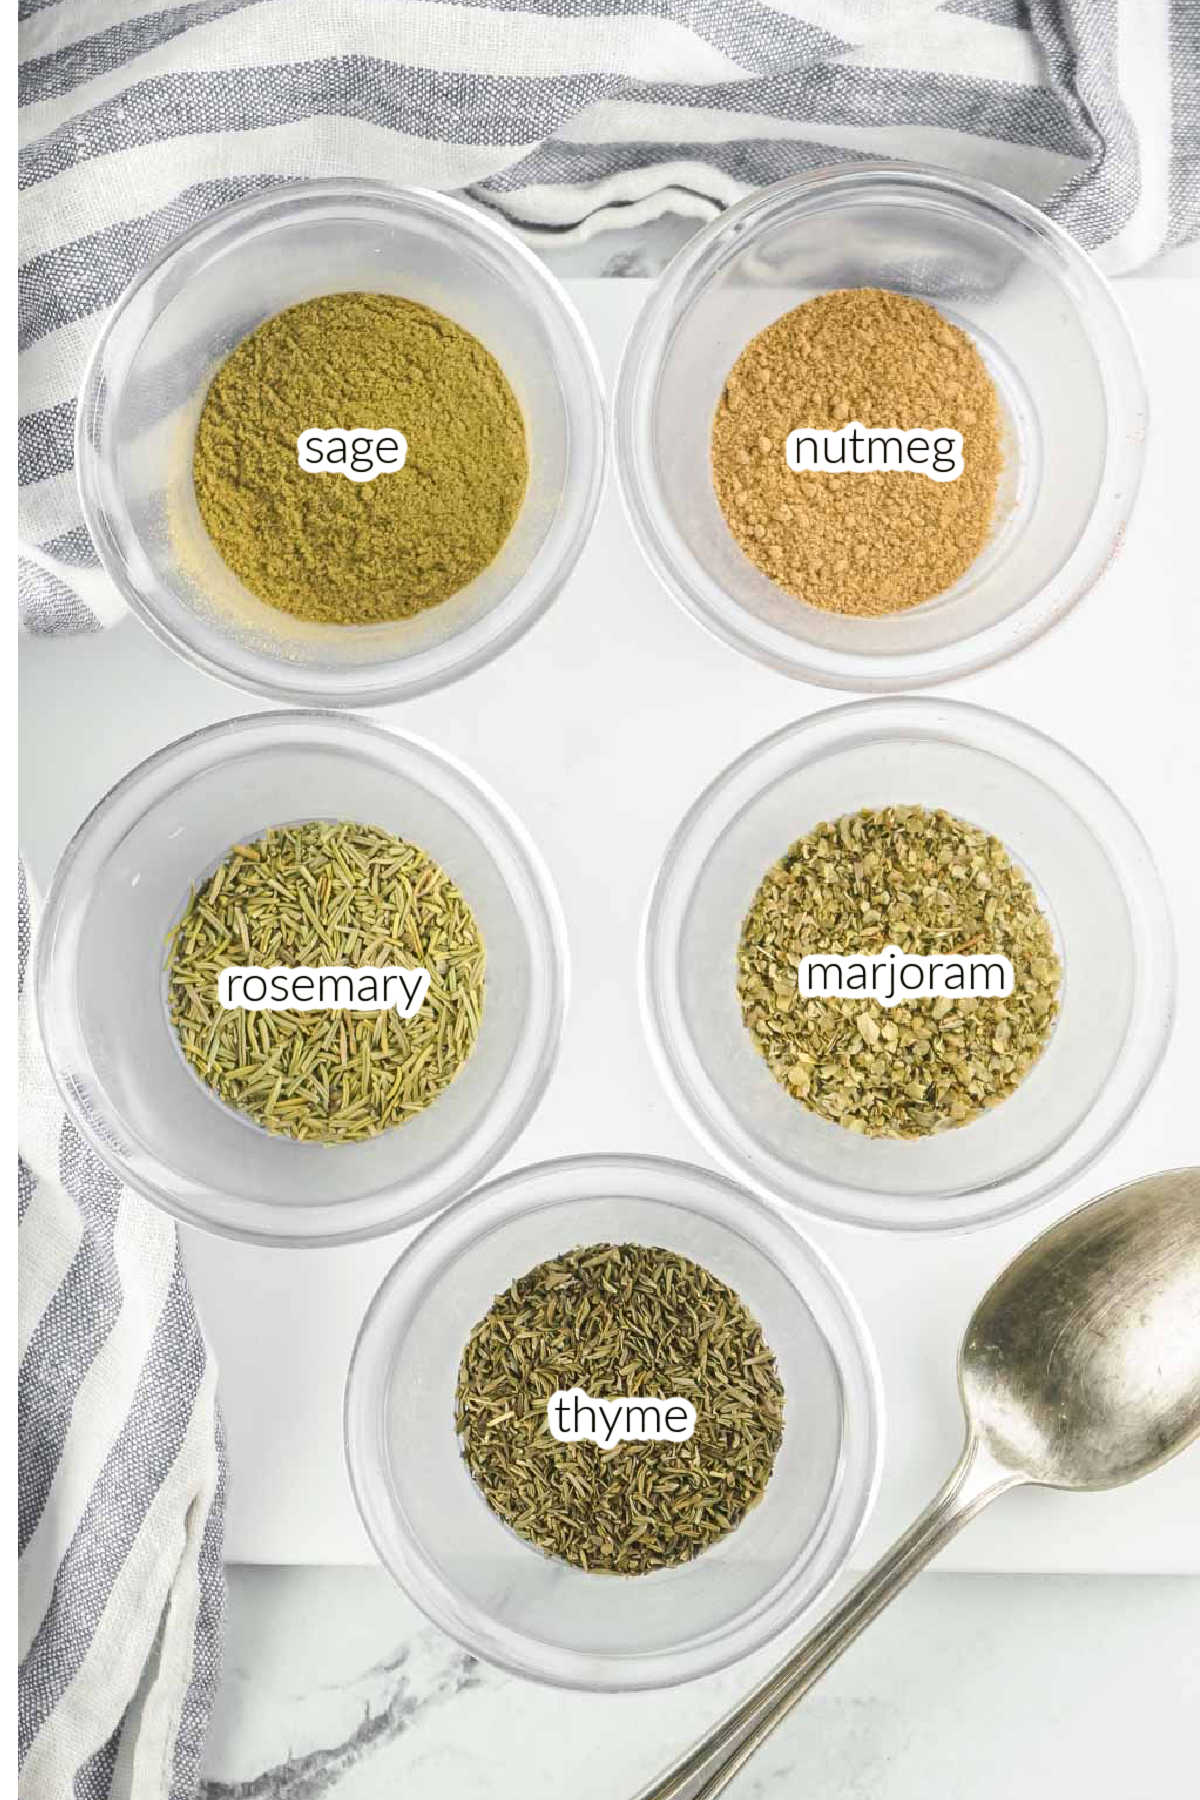 Five different types of herbs and spices for homemade poultry seasoning in small glass bowls.